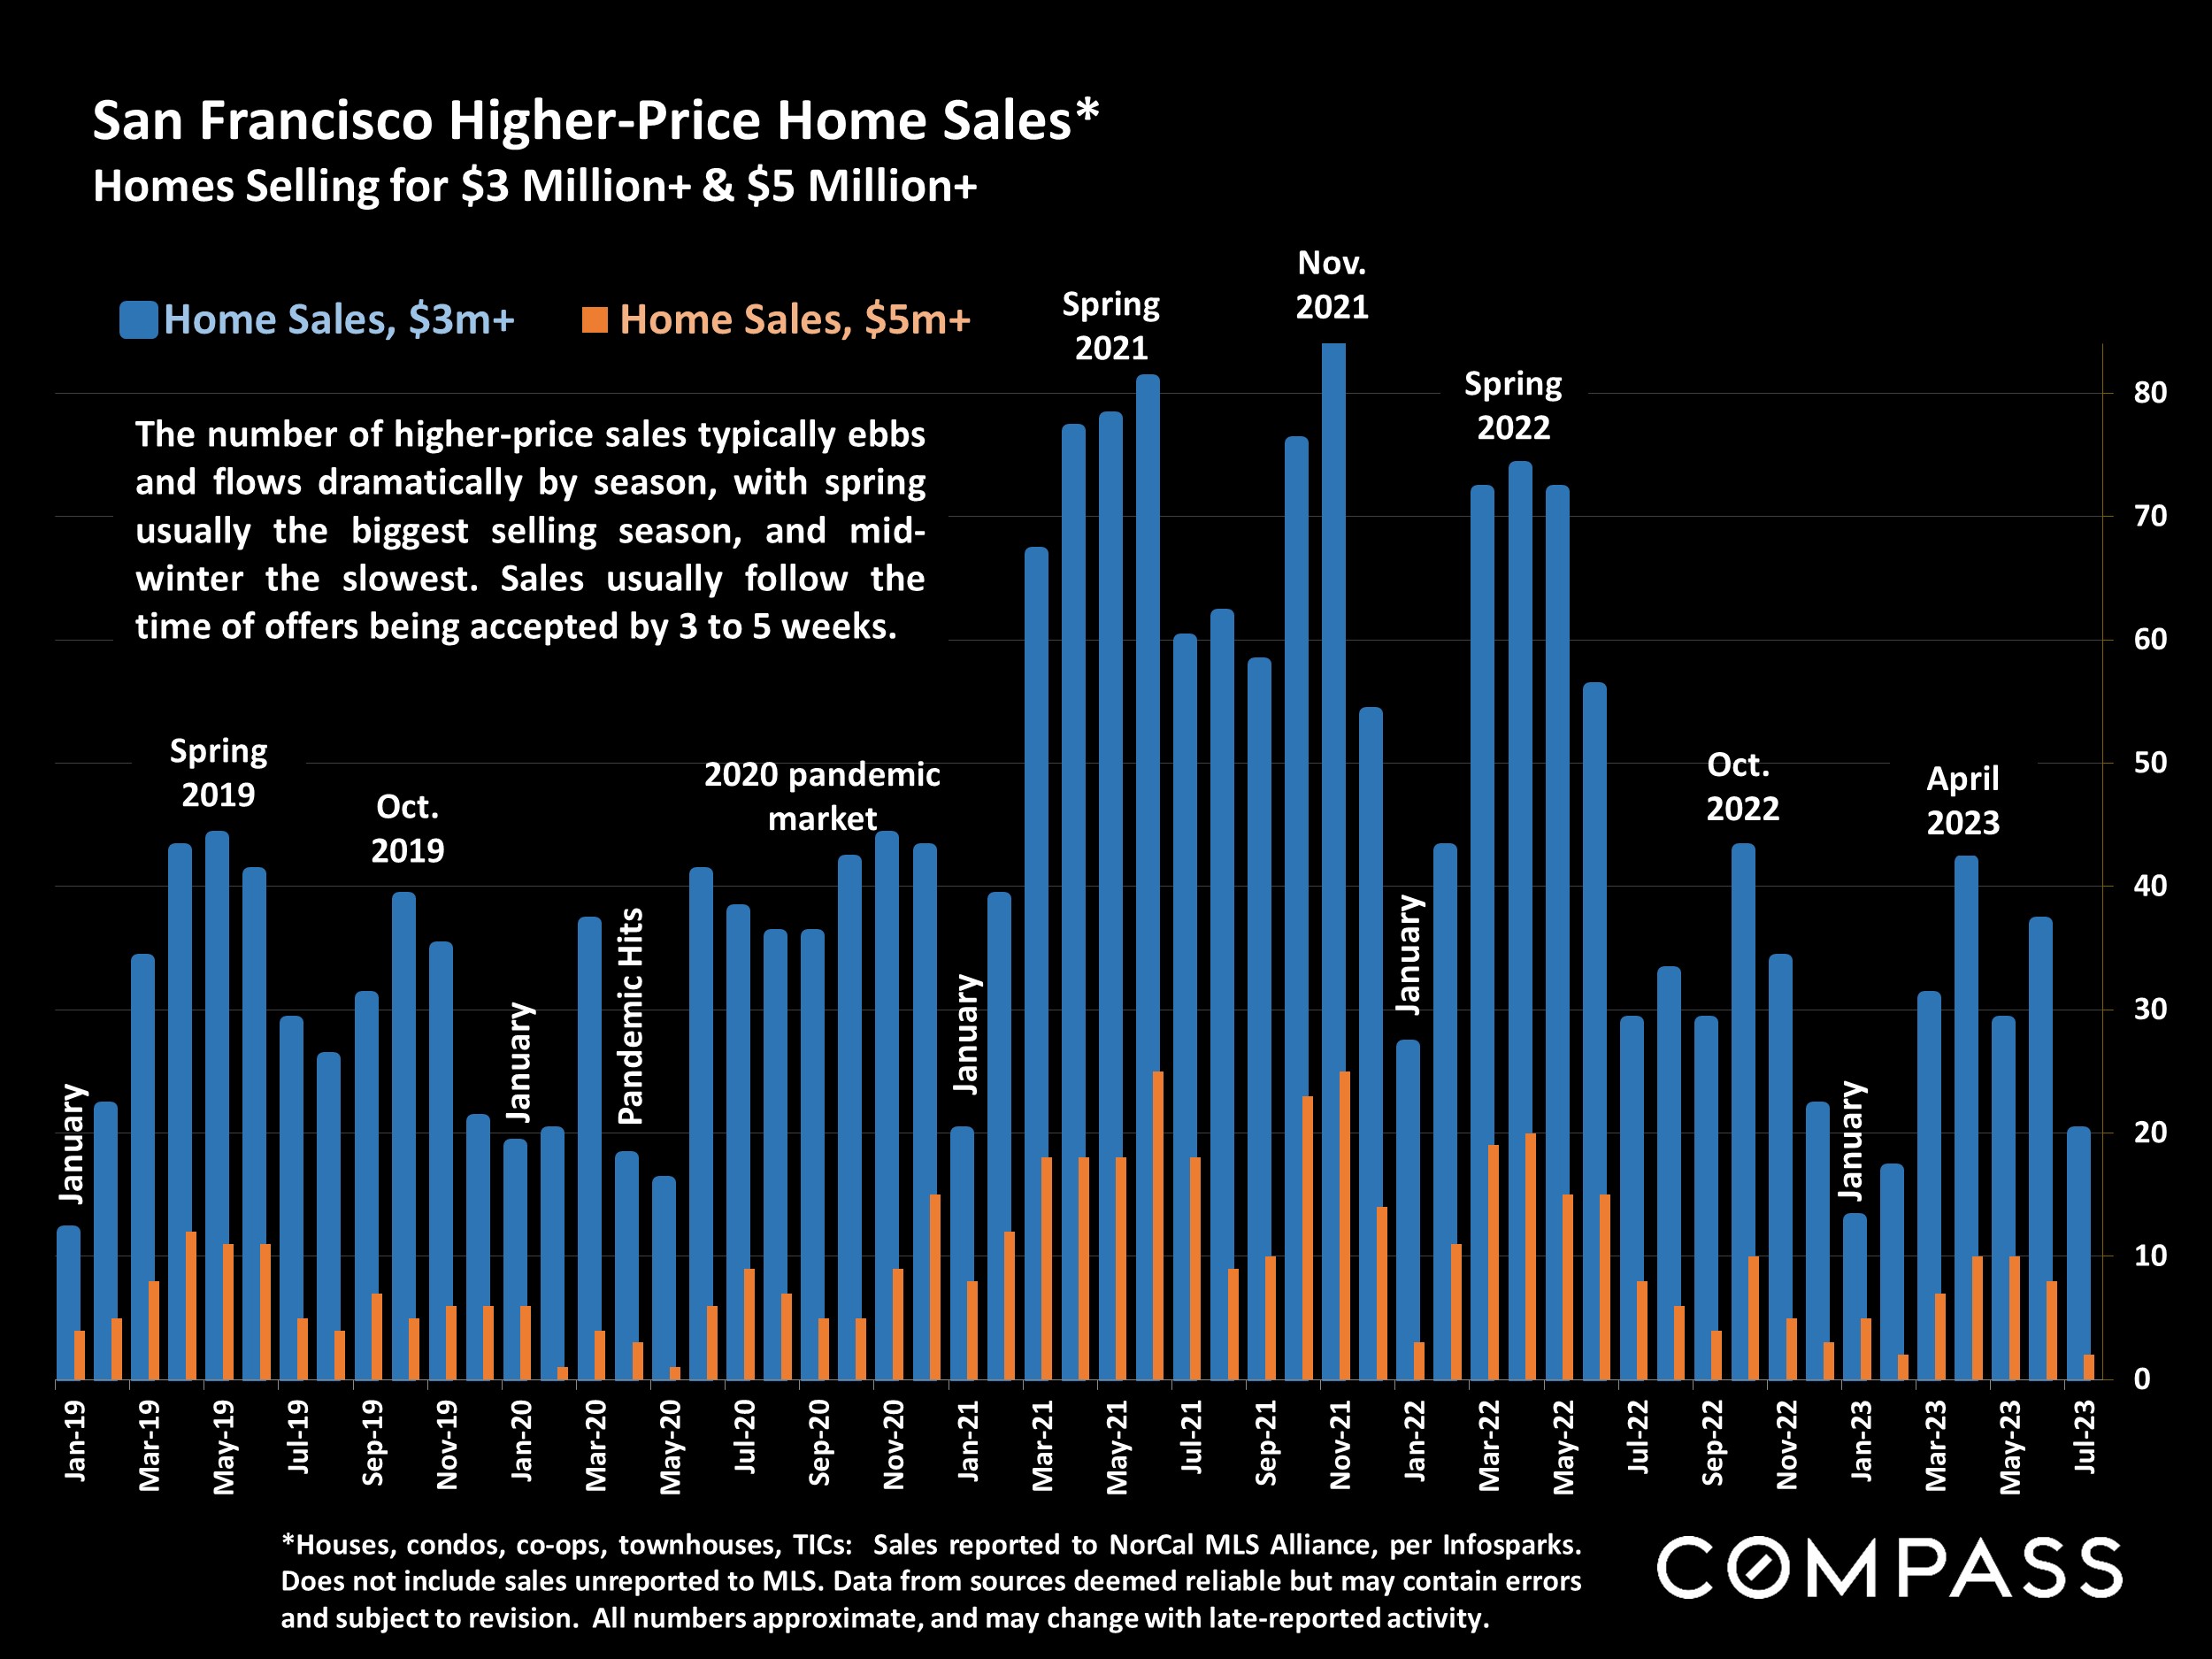 San Francisco Higher-Price Home Sales* Homes Selling for $3 Million+ & $5 Million+